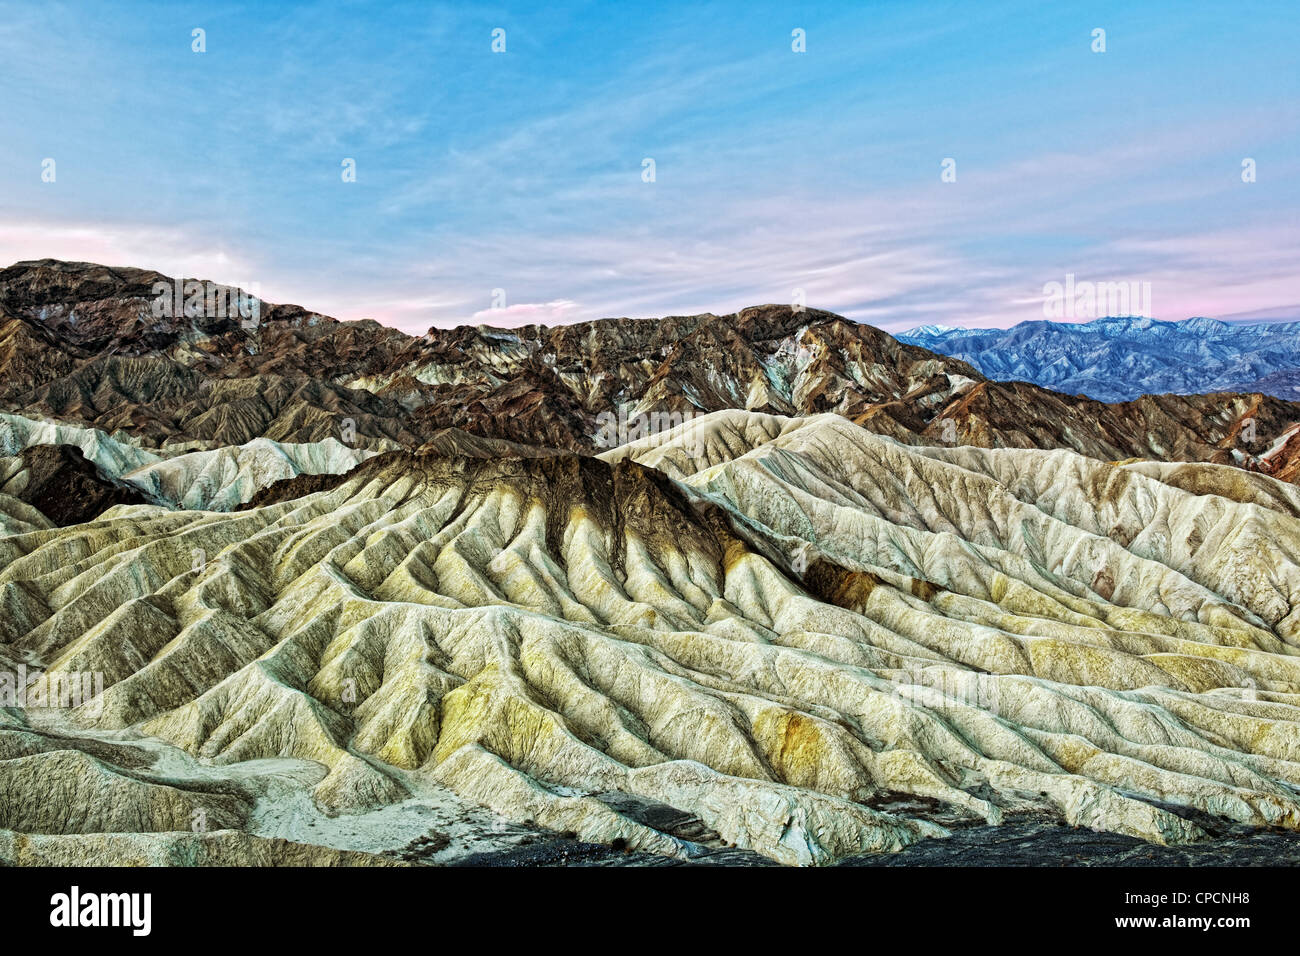 Sunrise over the Panamint Range and Golden Valley Badlands from Zabriskie Point in California's Death Valley National Park. Stock Photo